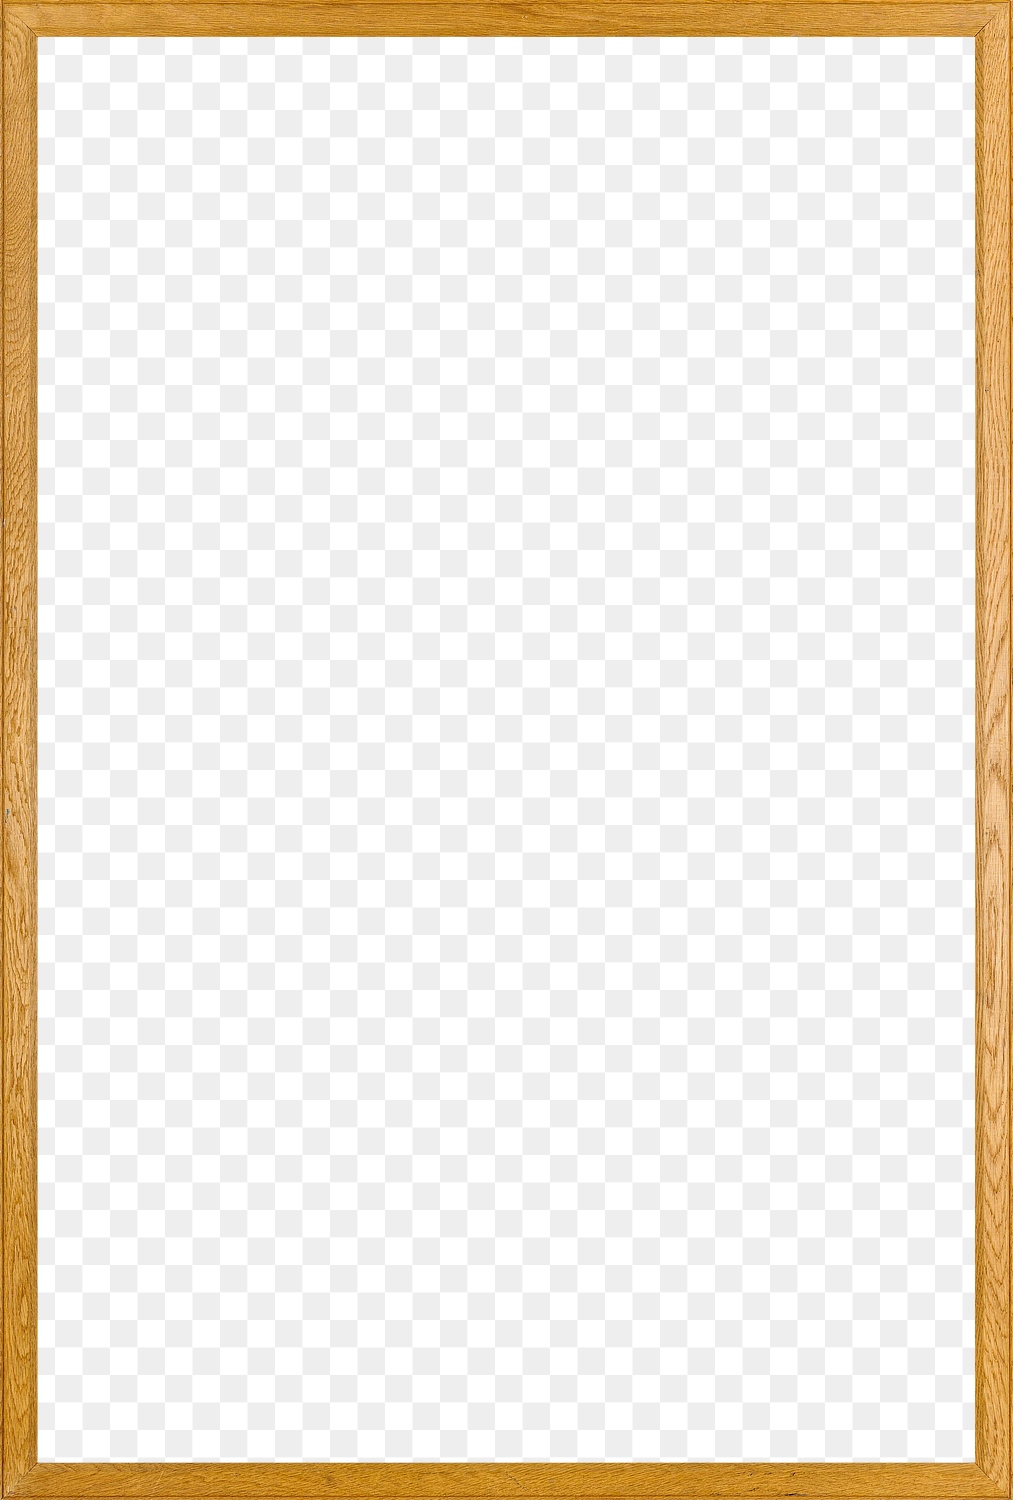 Simple wooden picture frame design | Premium PNG - rawpixel